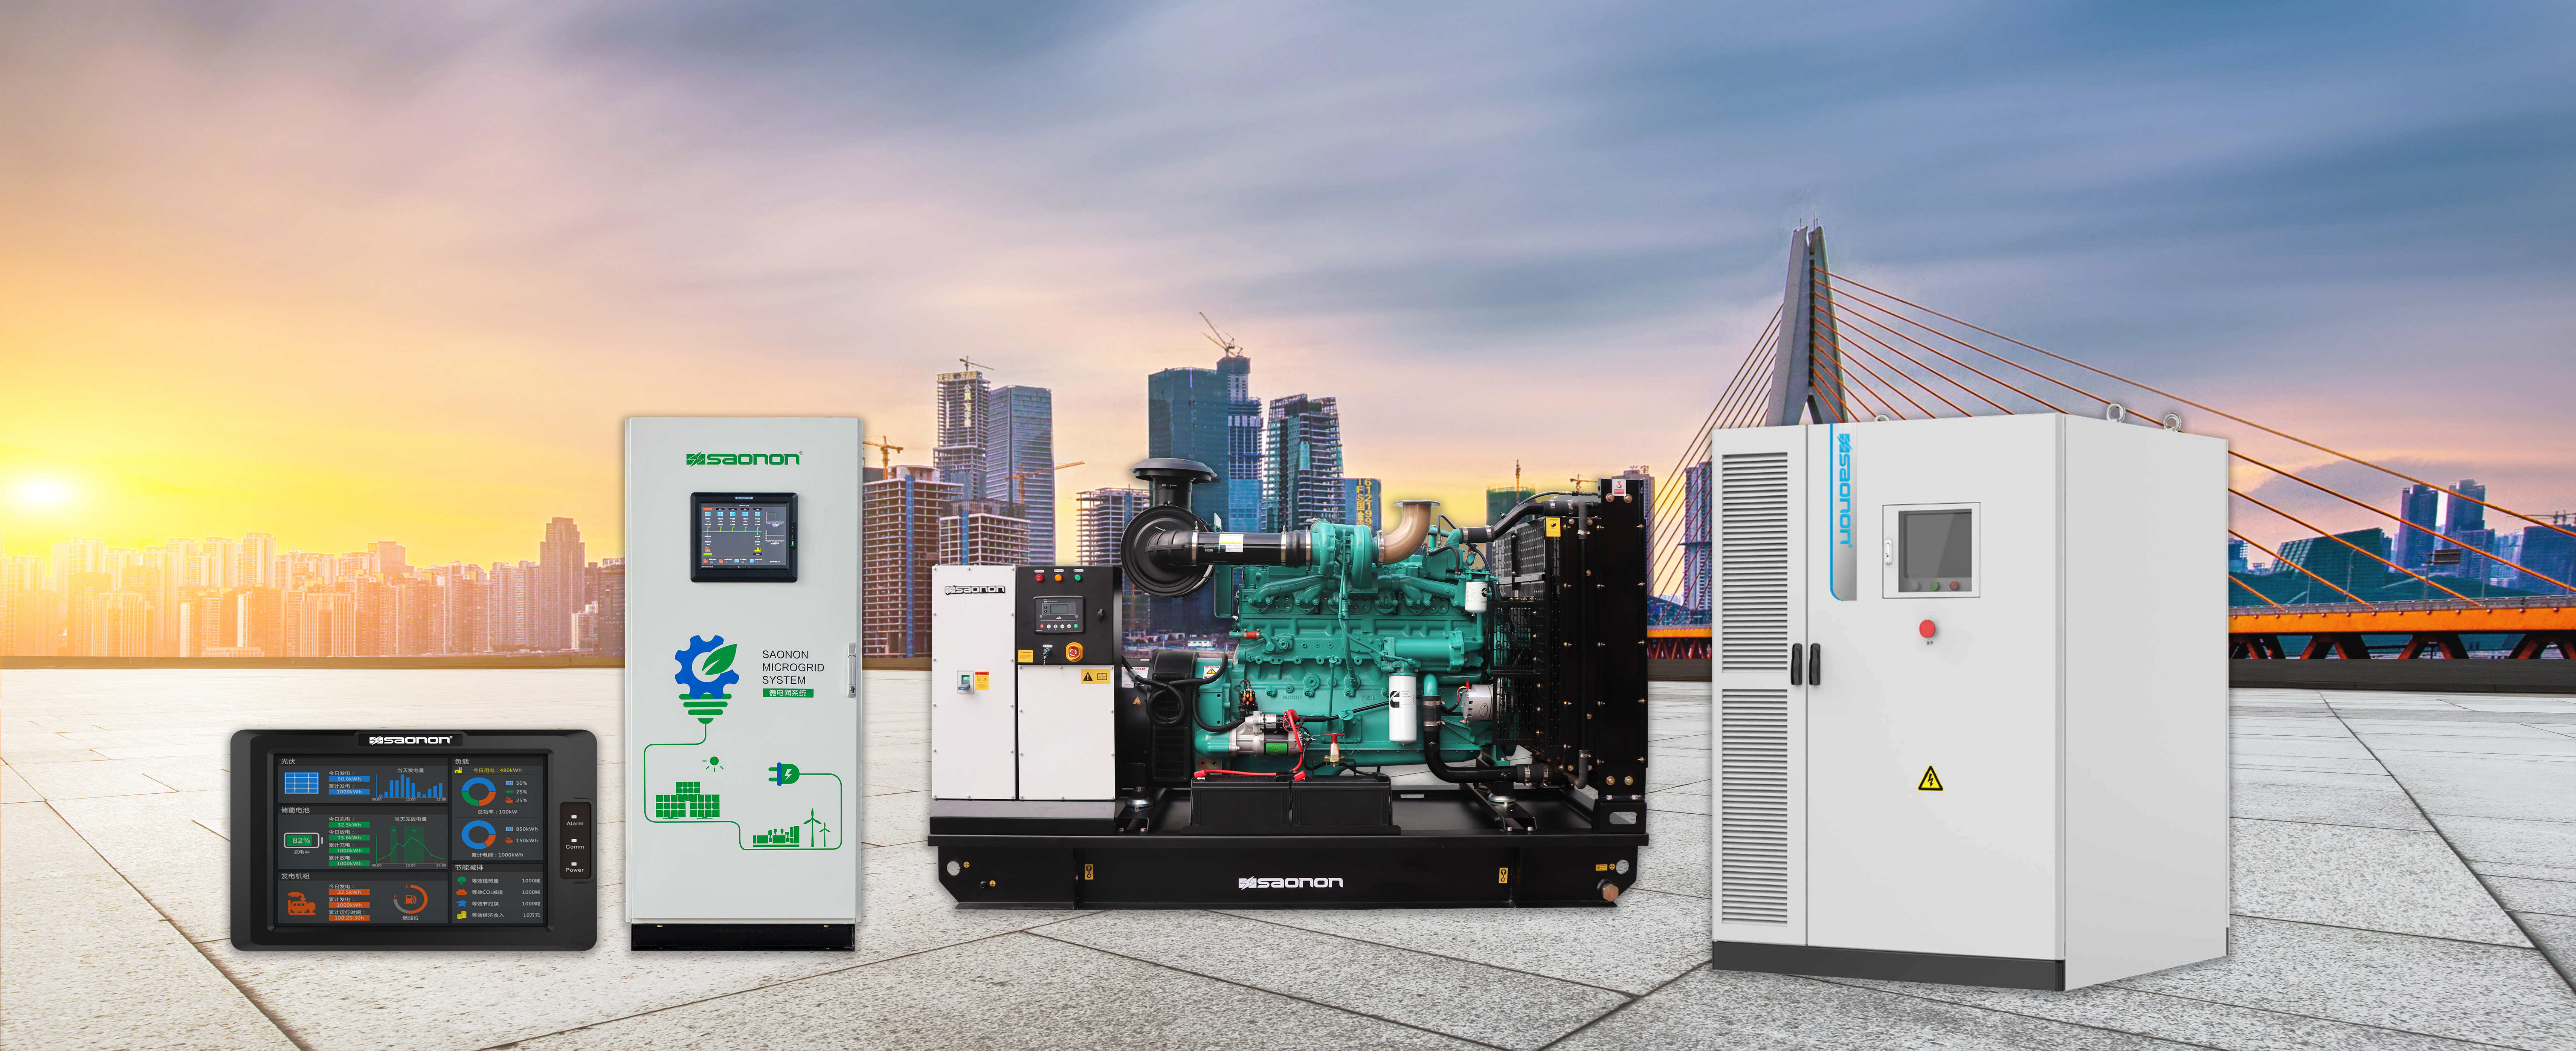 Lower cost, less carbon emissions! WANON Rolls out the “Generator-Battery” Hybrid Energy System